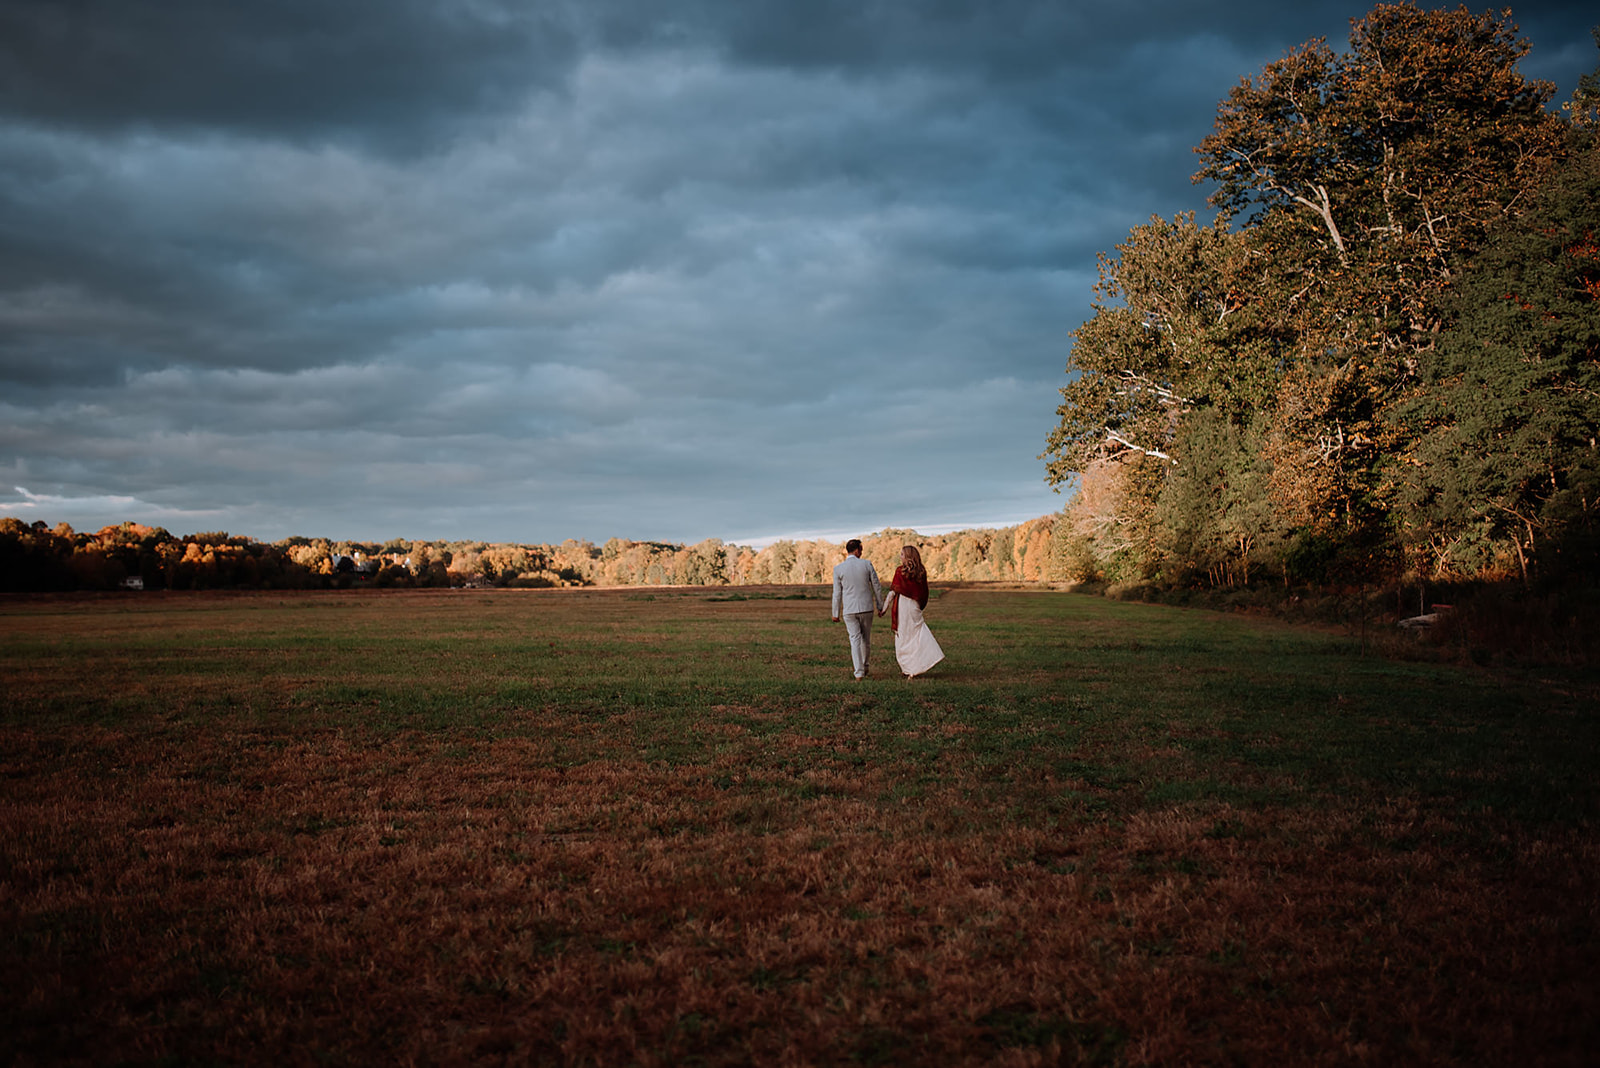 Couple wanders into field during golden hour on their wedding day.